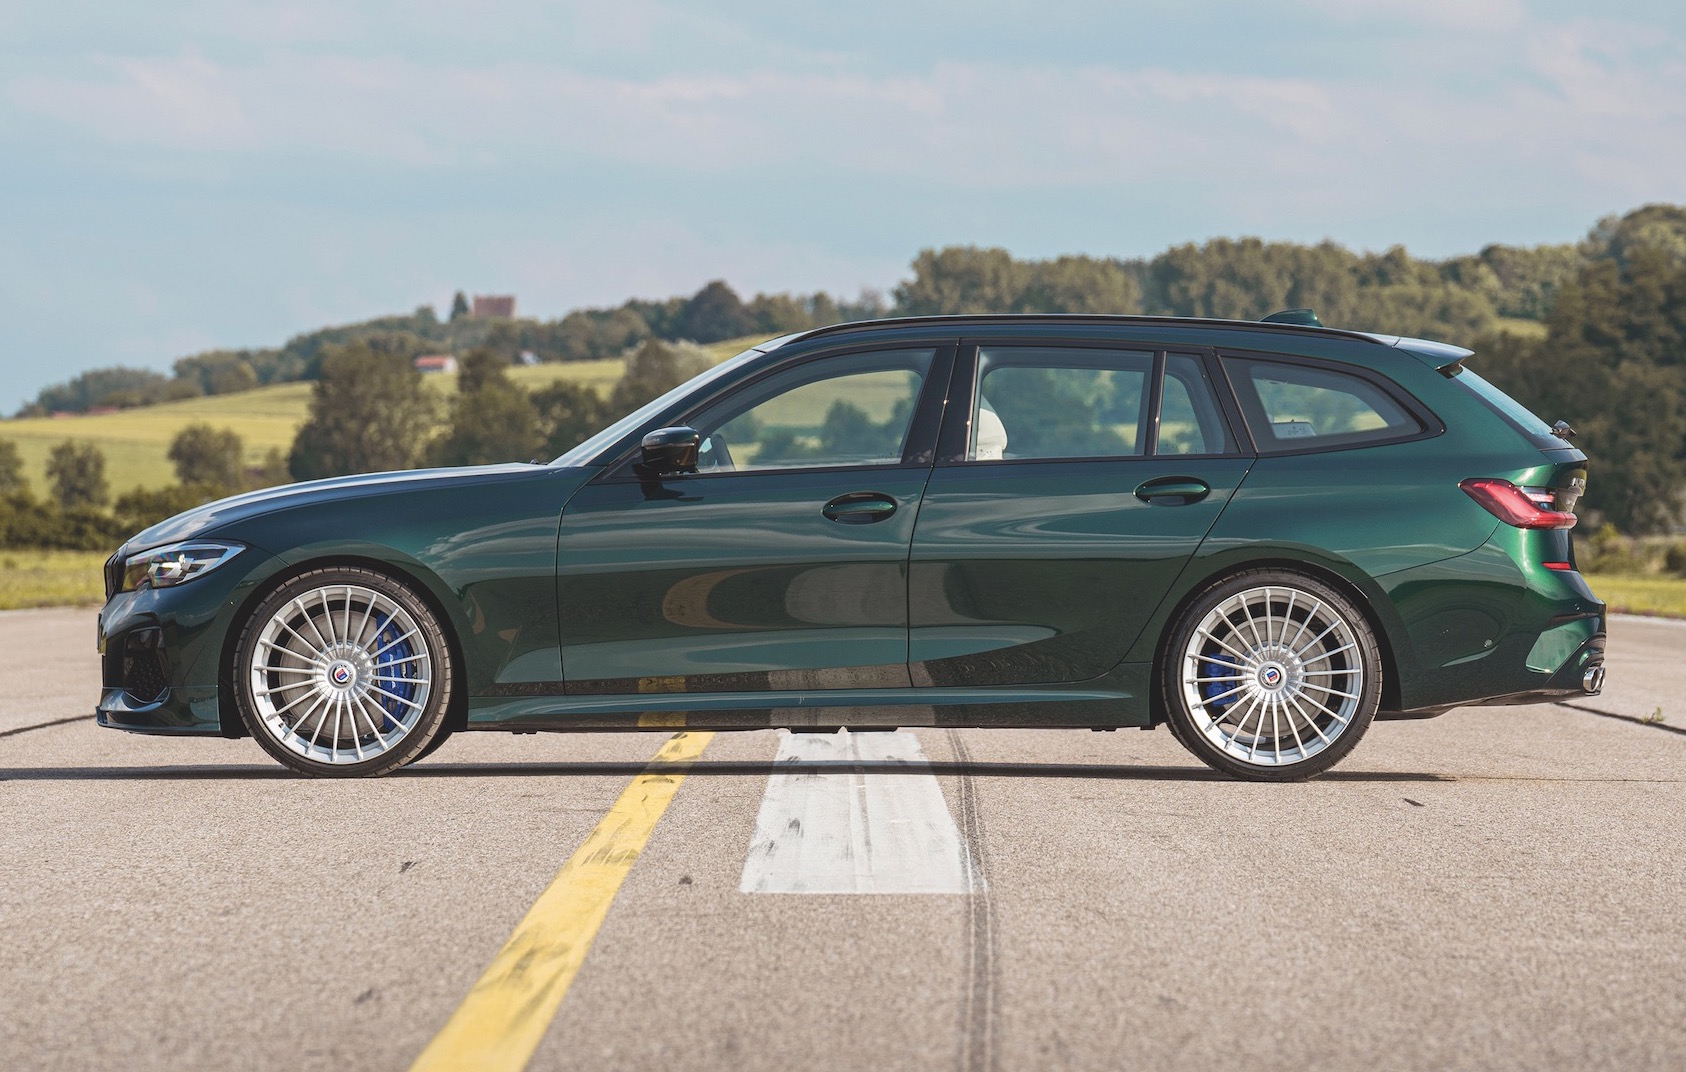 2020 Alpina B3 Touring confirmed for Australia, with S58 3.0TT